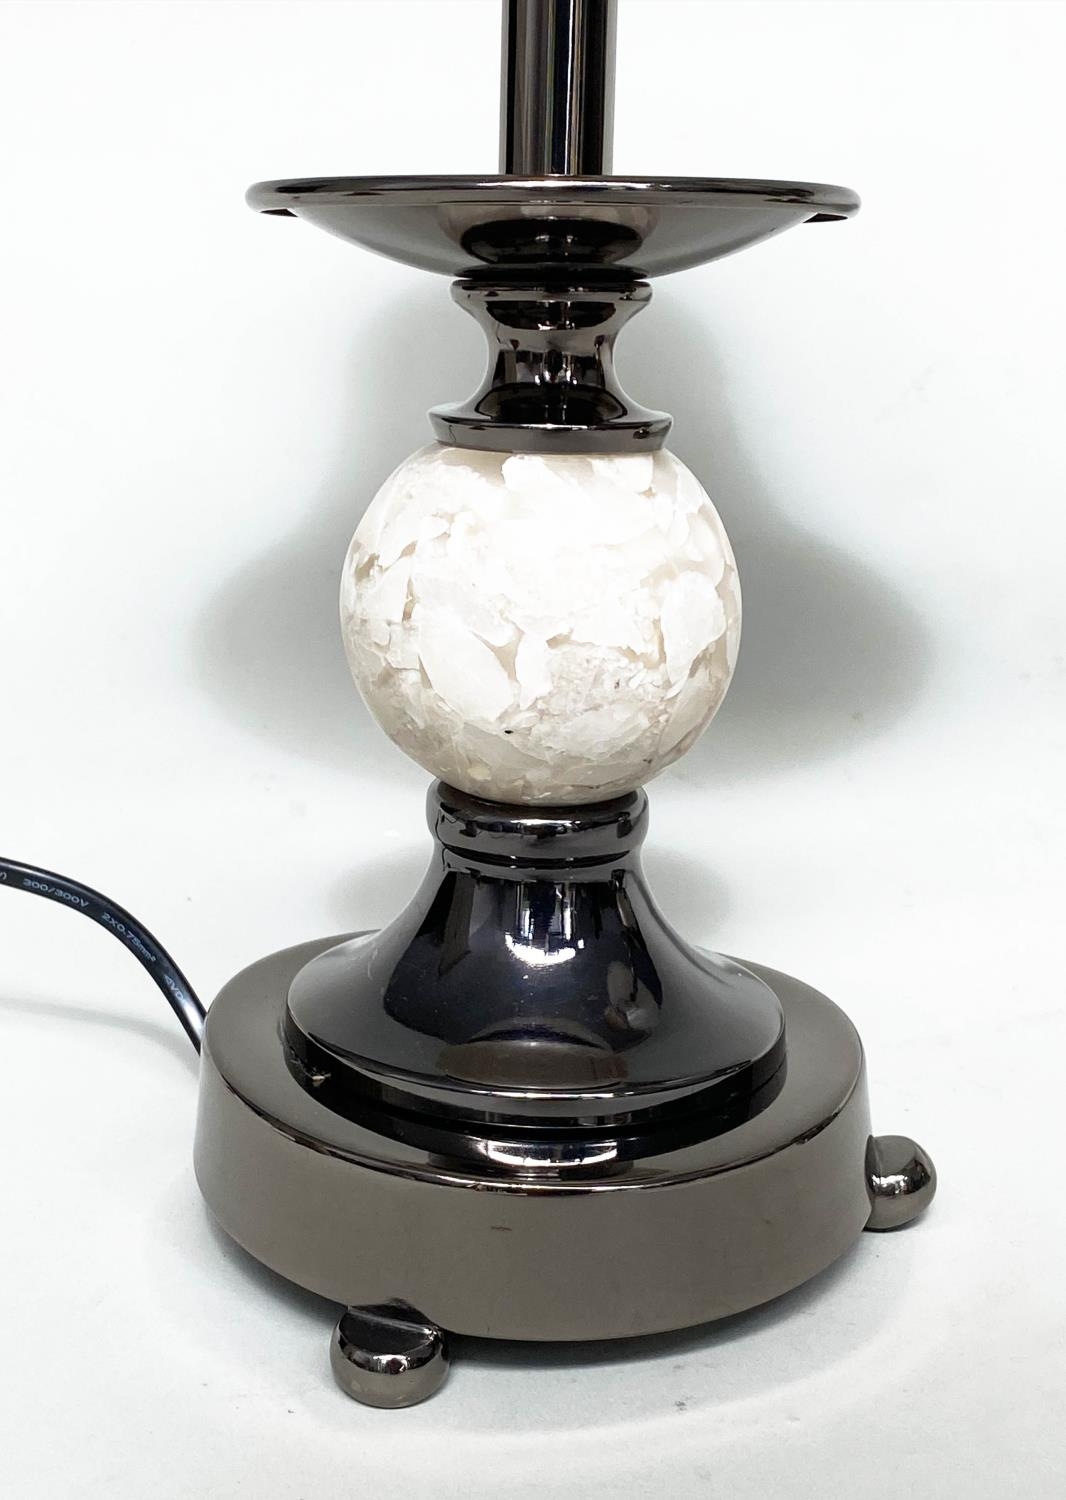 TABLE LAMPS, a pair, with chrome columns and a reconstituted marble spheres (with shades), 60cm - Image 2 of 6